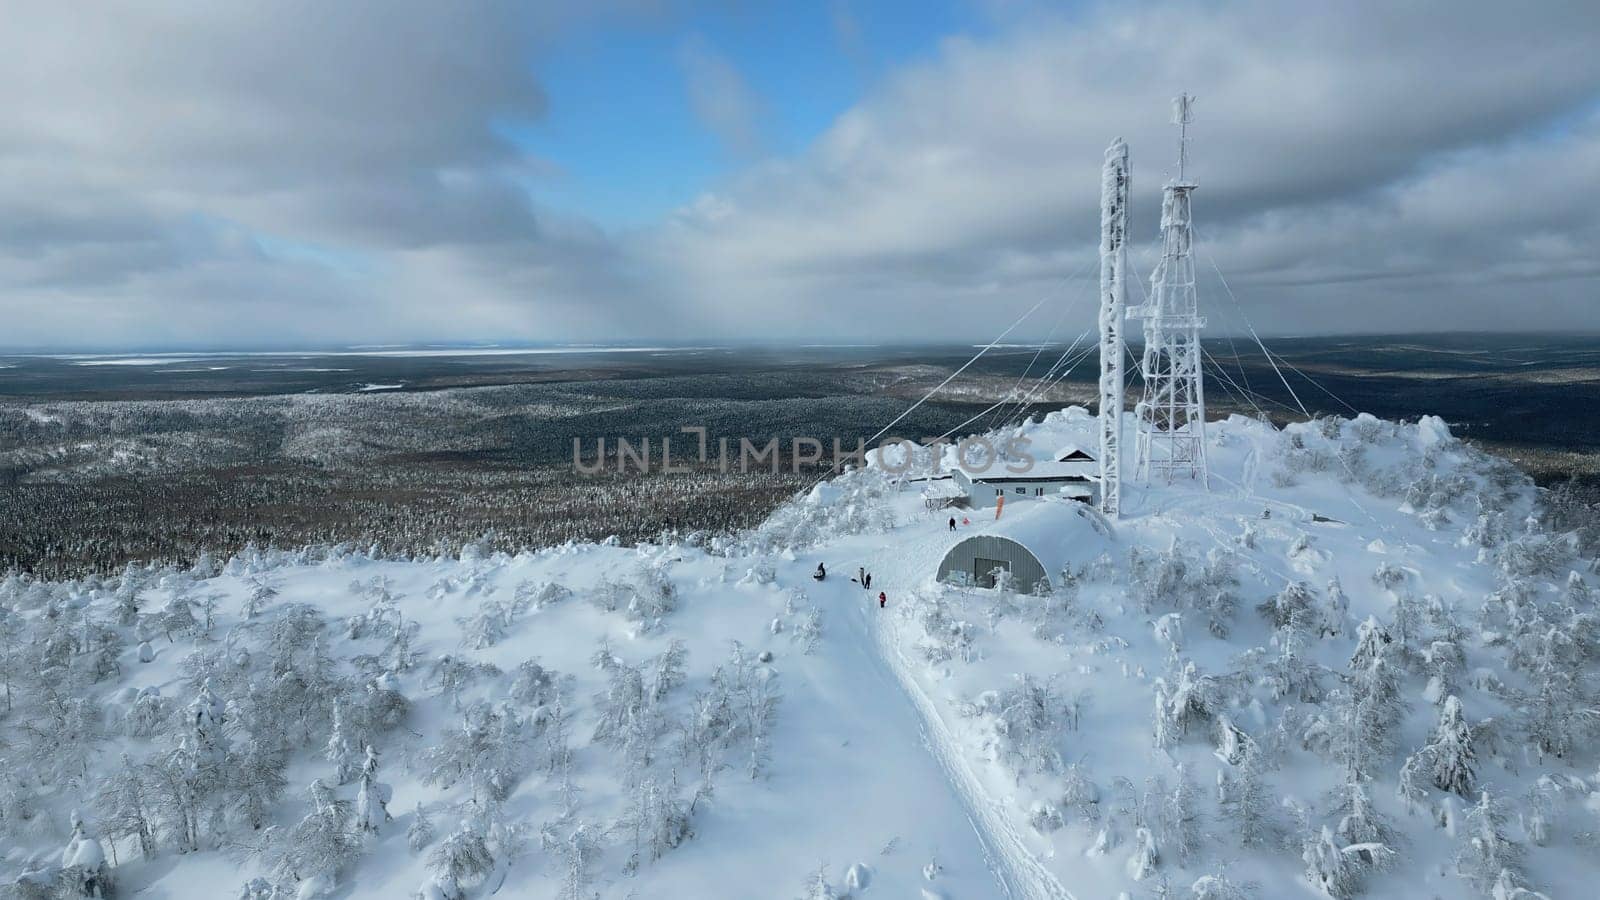 A flight over the dense winter Siberian forest in the afternoon. Clip. White mountain and a frozen weather tower on its top